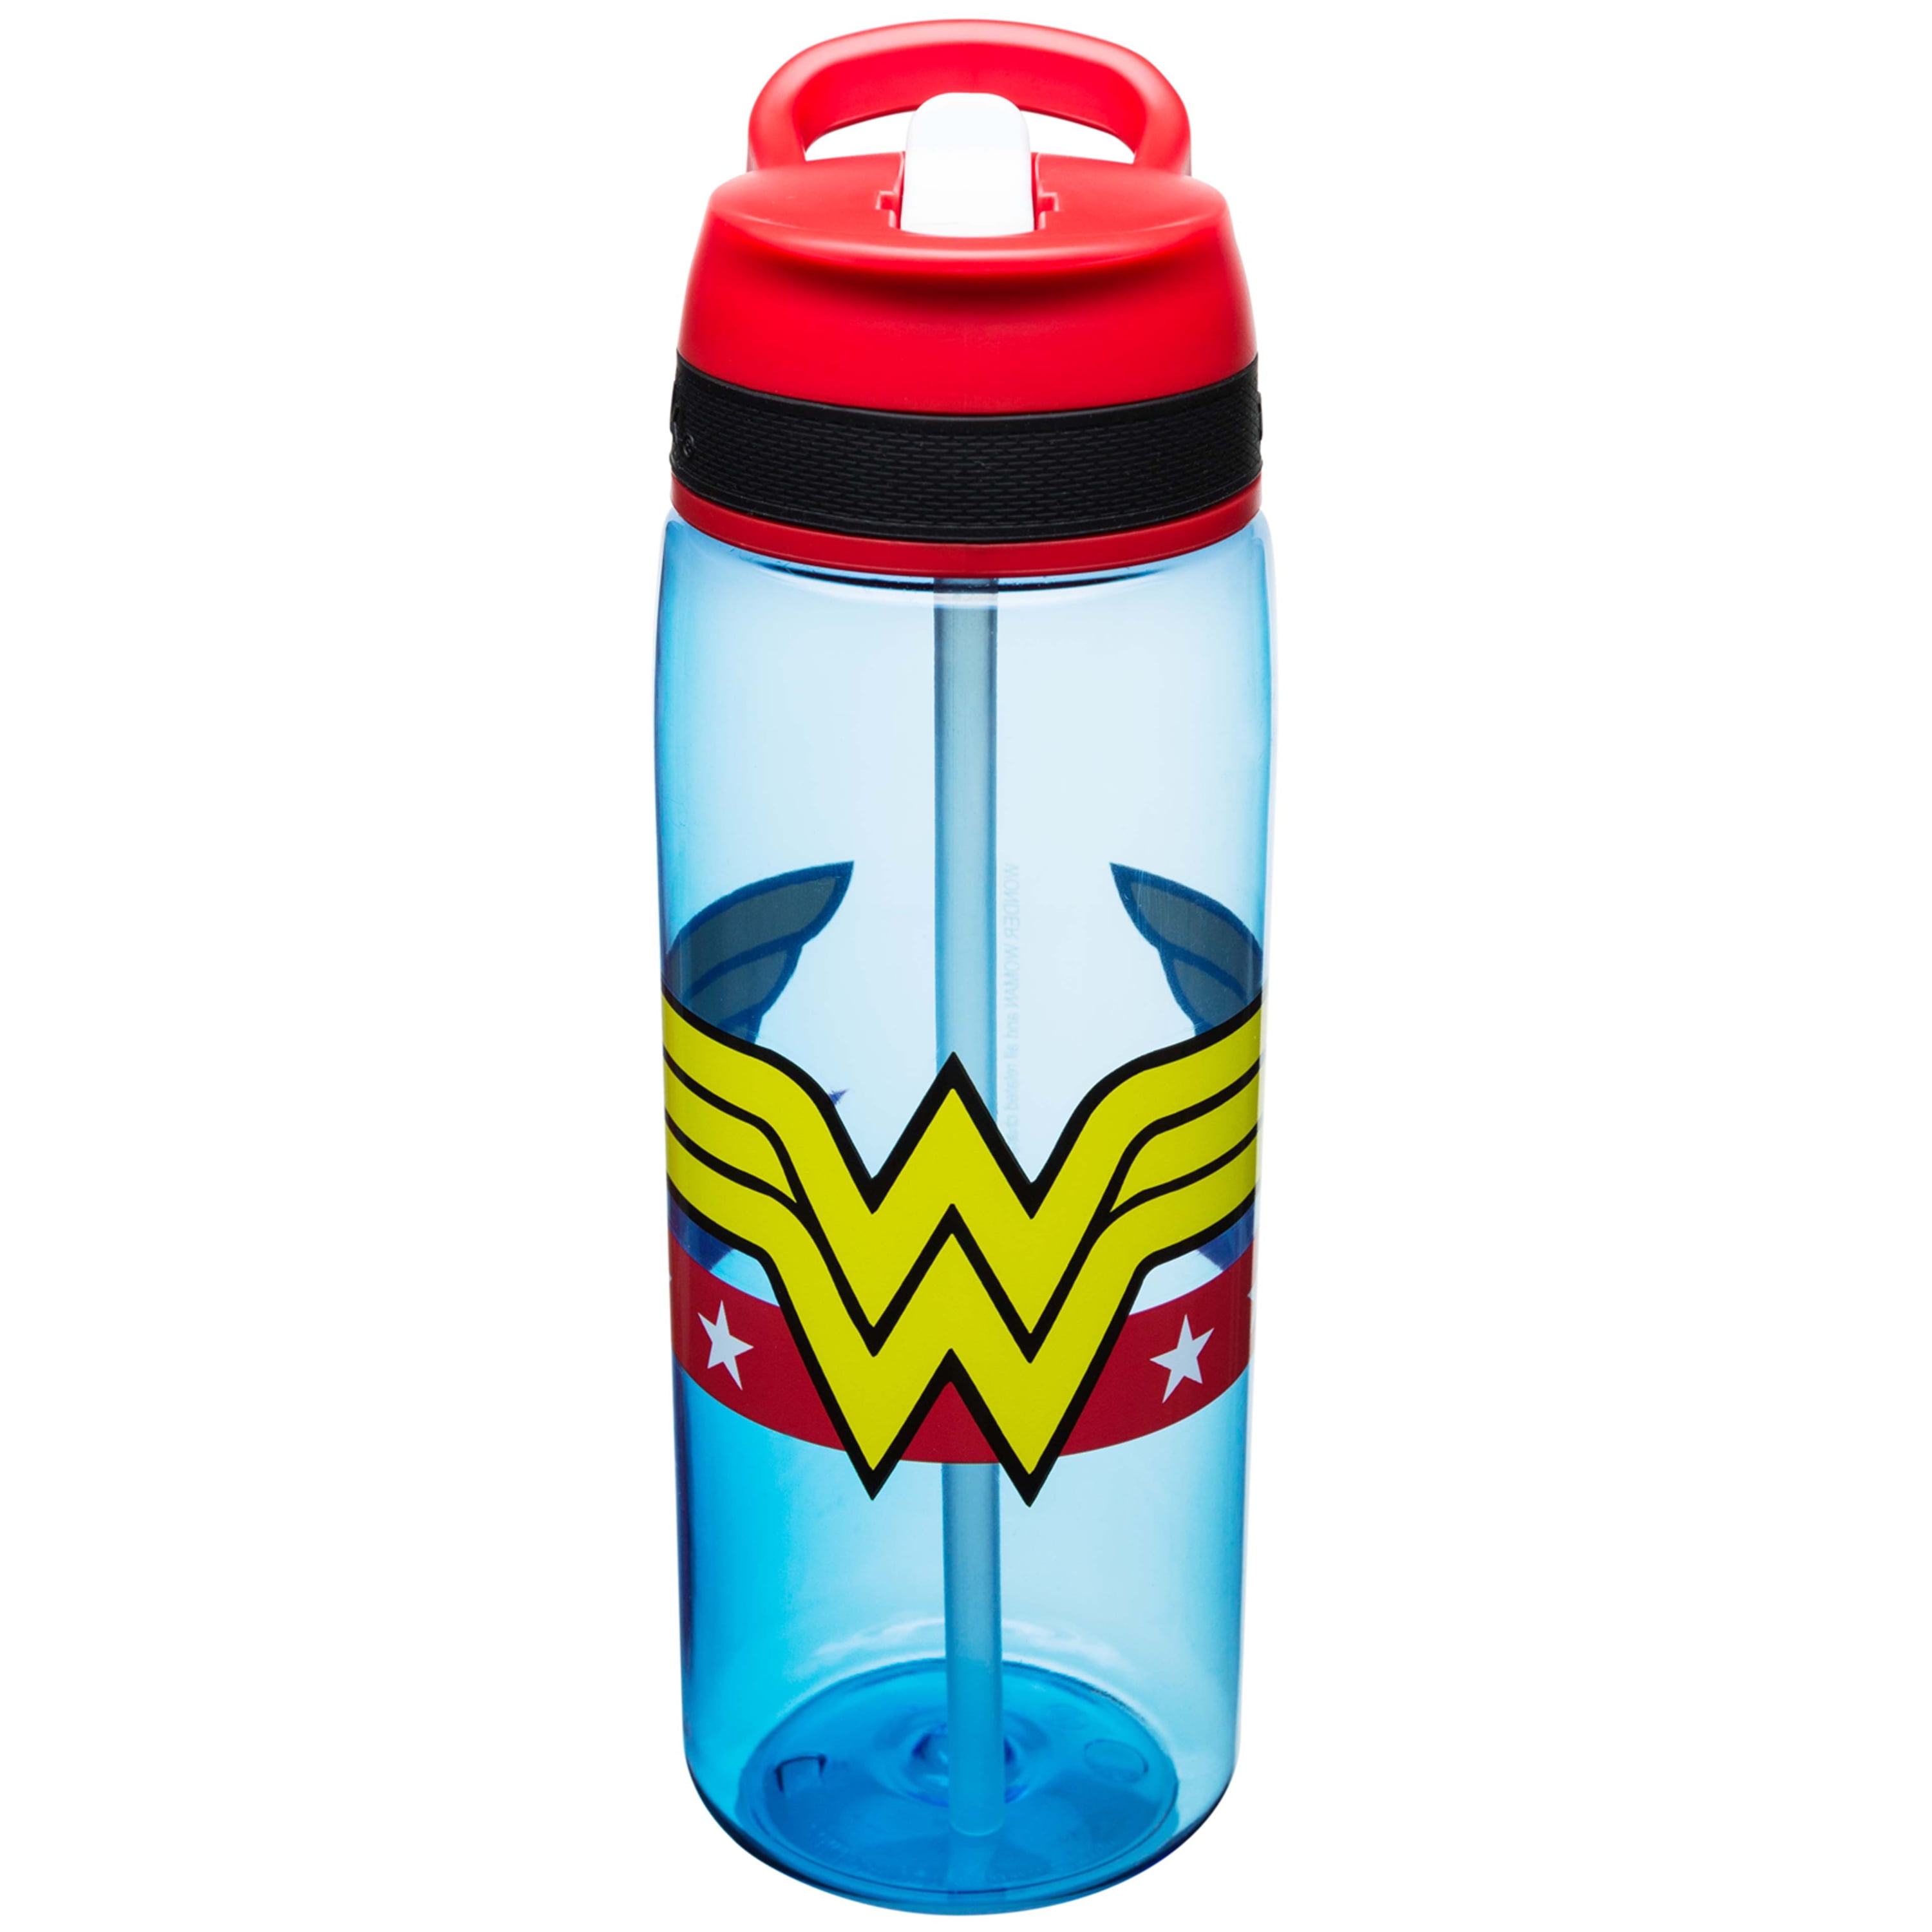 Zak Designs 25 oz Kids Plastic Water Bottle with Straw Spout and Carry  Handle for Travel Drinks, Wonder Woman